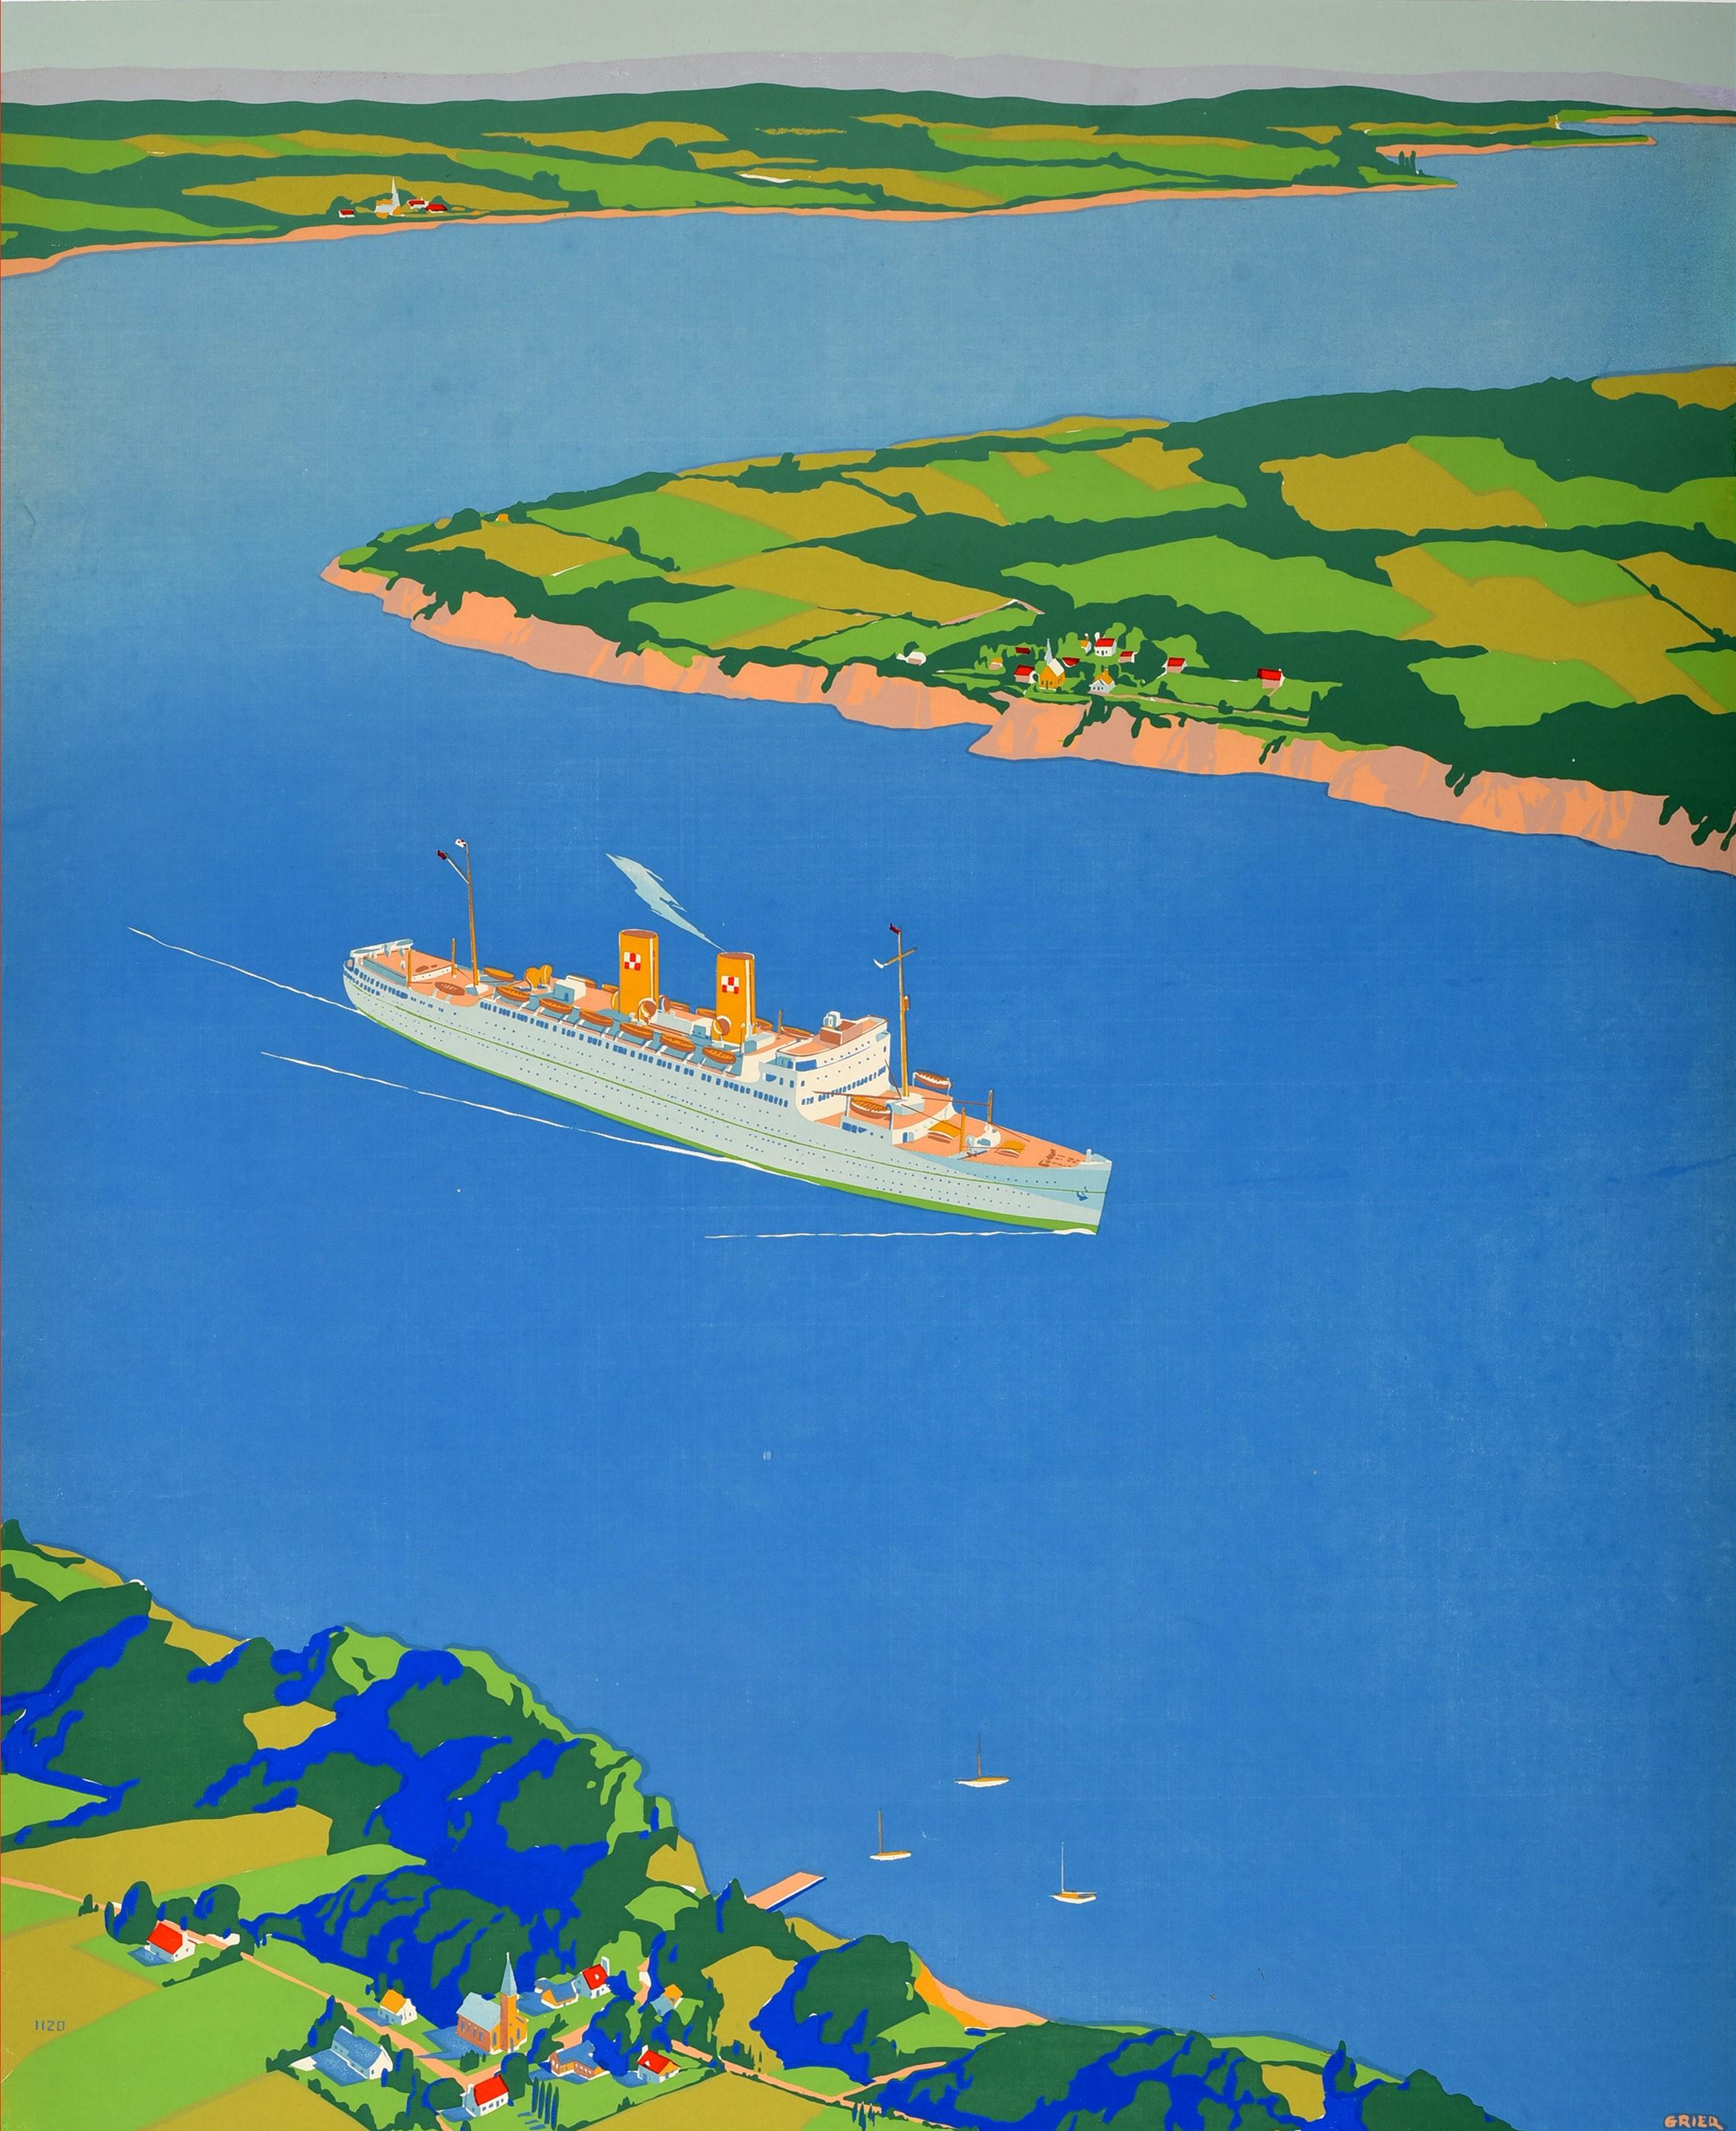 Original vintage cruise travel poster for The St Lawrence Route to Europe issued by Canadian Pacific featuring a great image viewed from above of an ocean liner sailing along a scenic river passing three sailing boats with villages, trees and fields